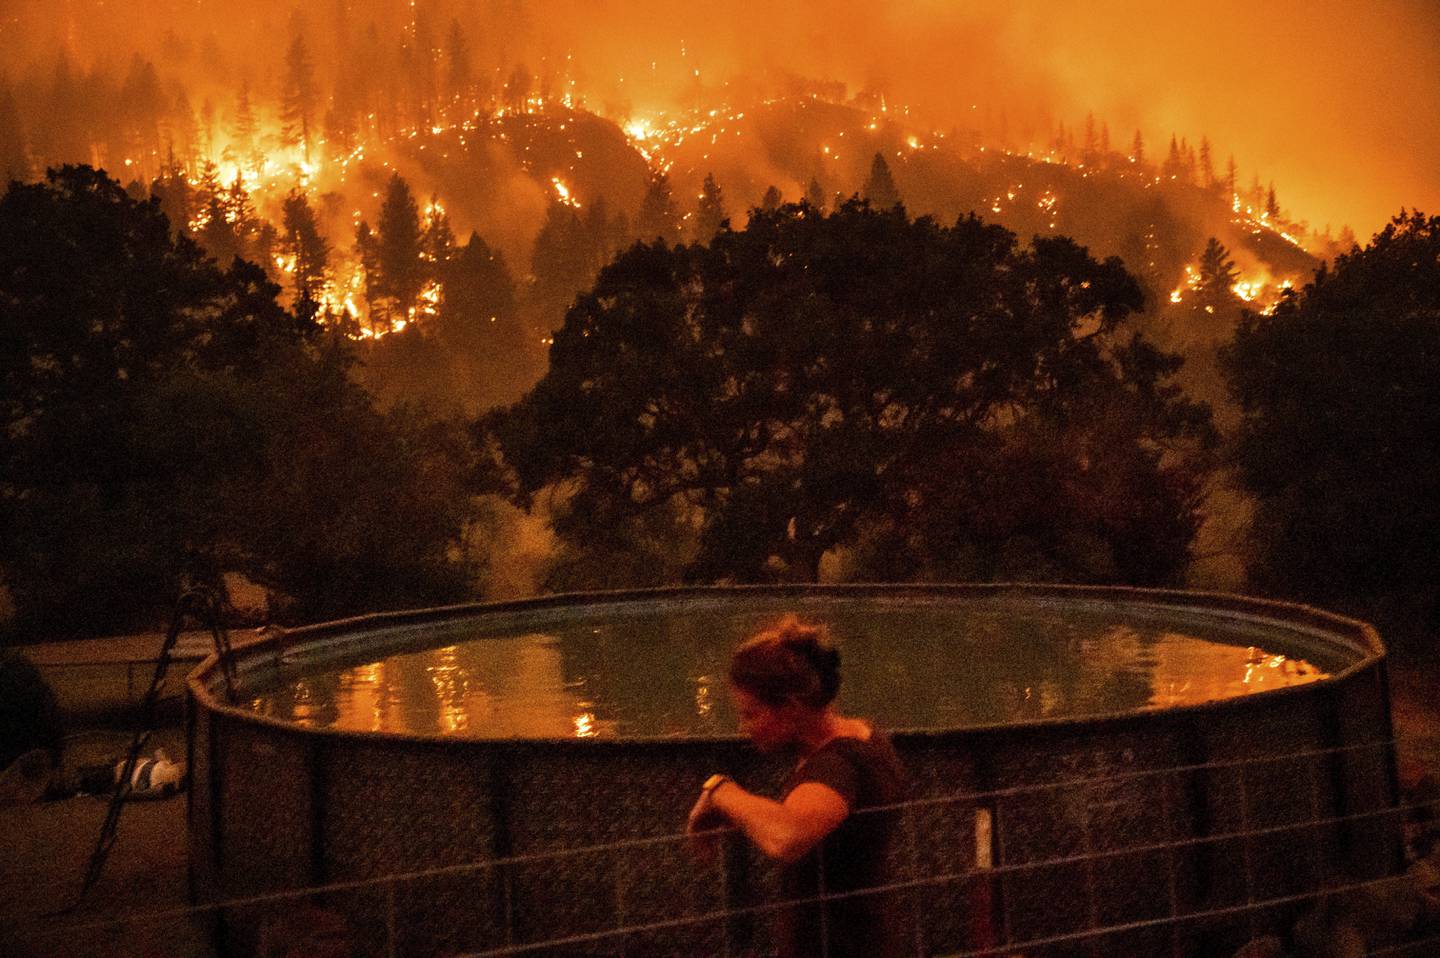 A Klamath National Forest resident feels the effects of Mckinney's flames on Saturday night. AP